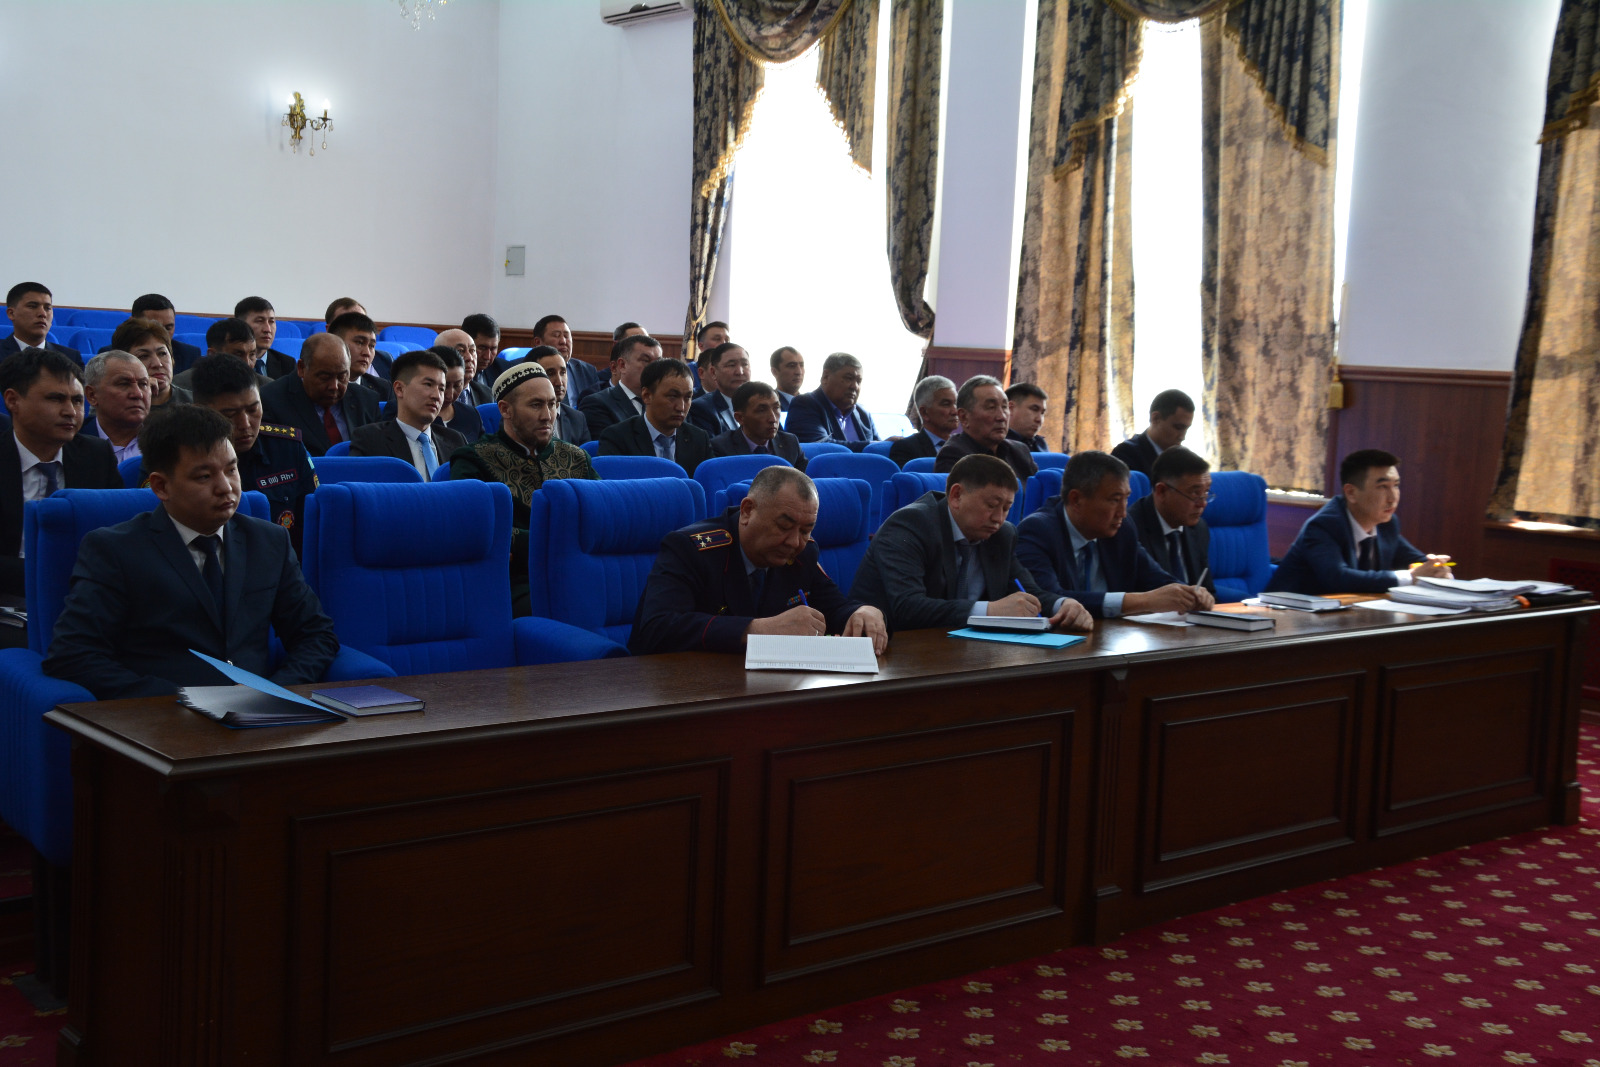 A MEETING OF THE ANTI-TERRORIST COMMISSION WAS HELD